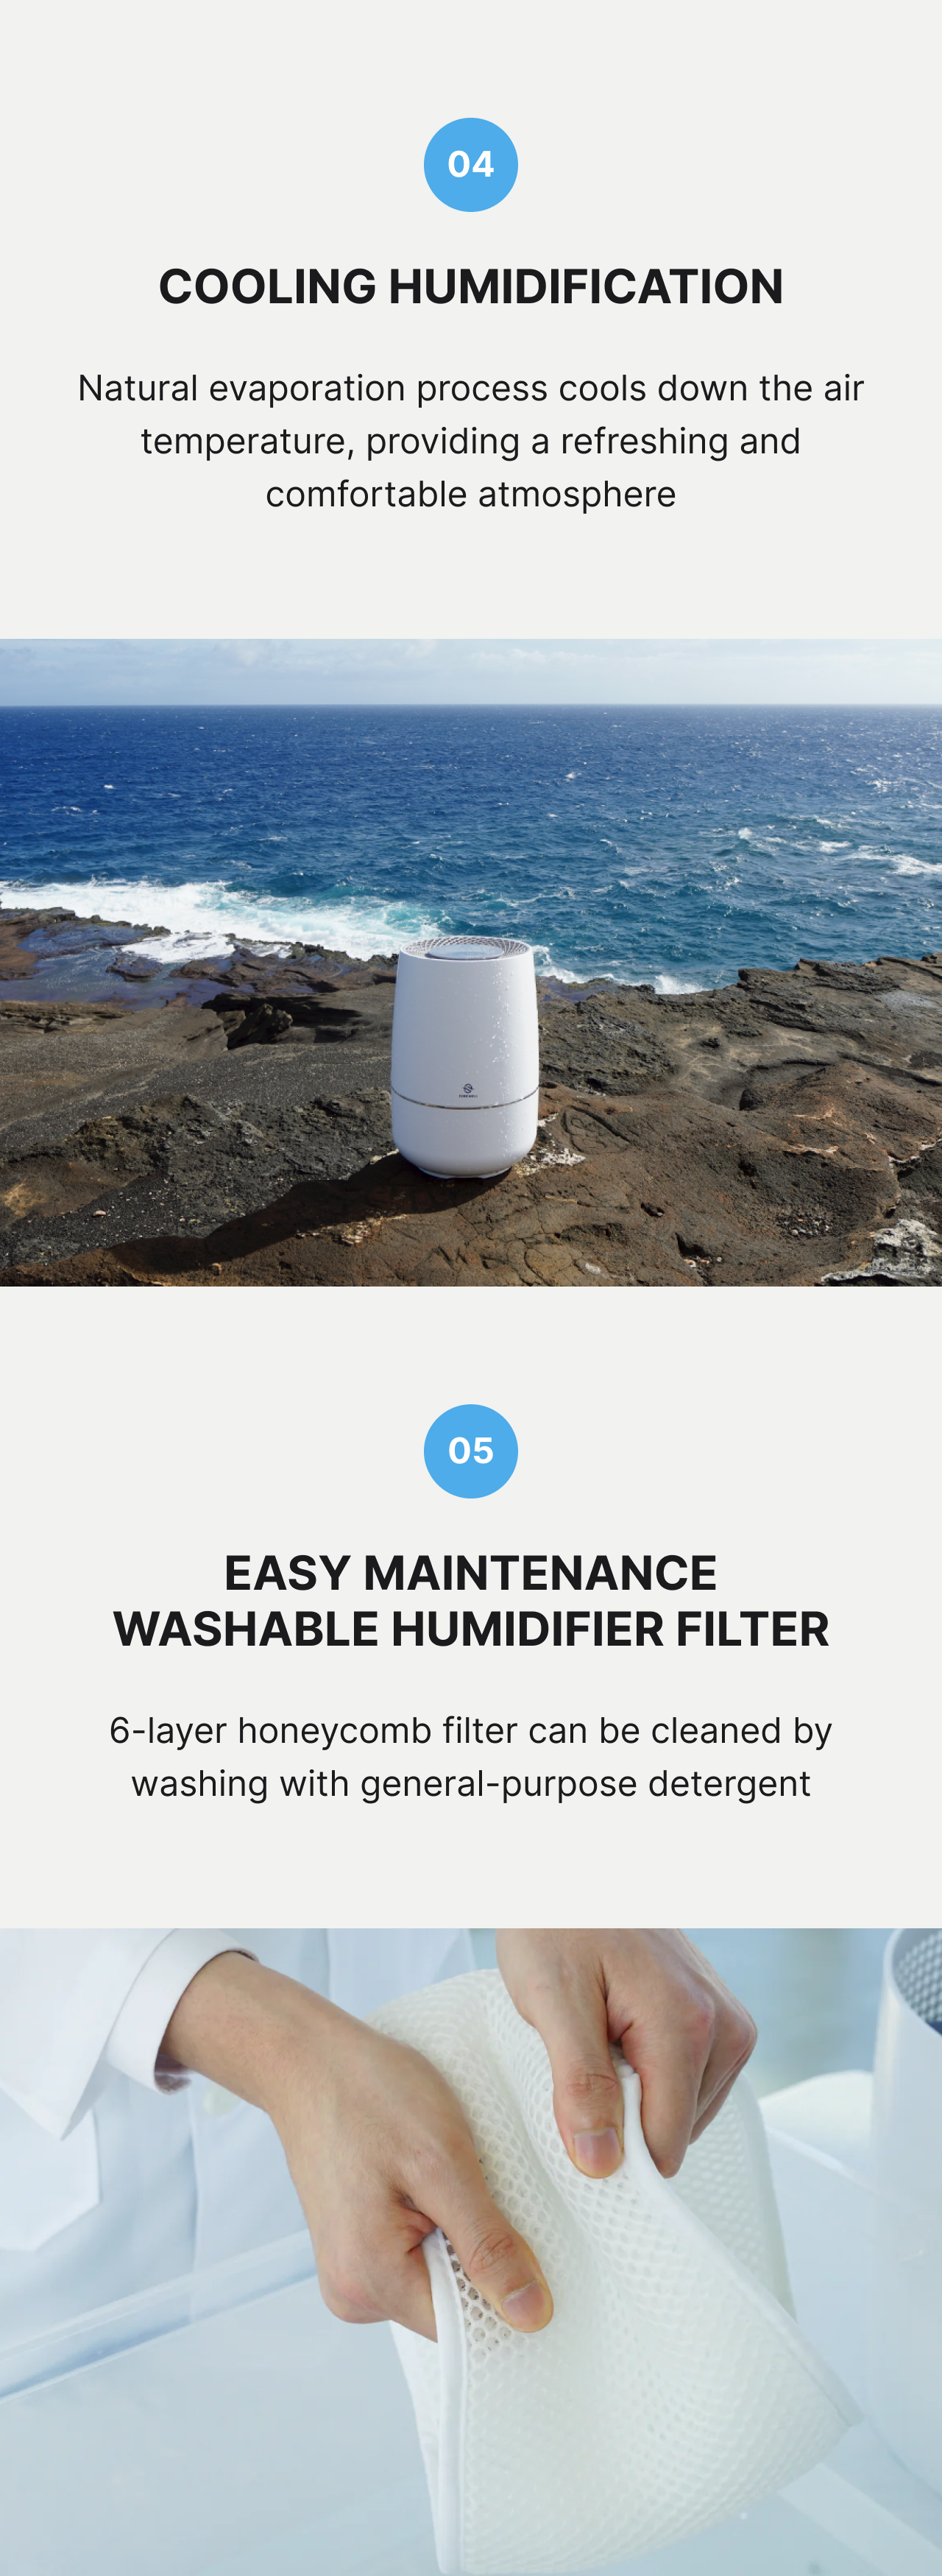 Humidifier product description image describing how the humidification cools the air and the humidifier filter is easy to maintain because you can easily wash the 6-layer honeycomb fiber filter with general-purpose detergent